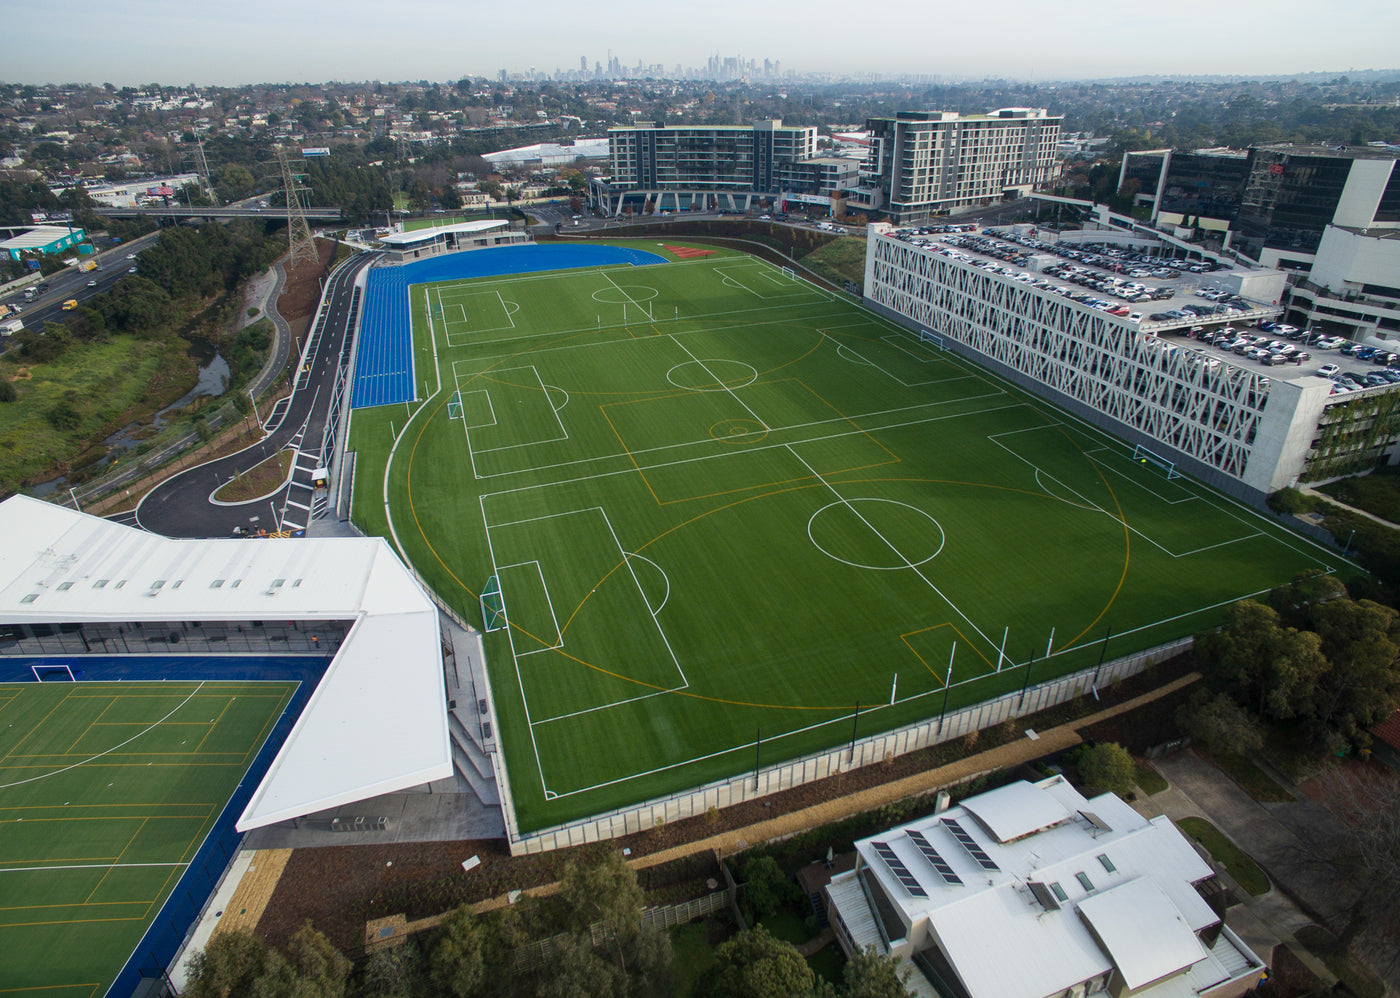 St. Kevin's College Sports Fields - Tuff Group, Australia’s leading outdoor education turf & synthetic grass sports specialists for rubber athletics and running tracks, hockey, football, soccer, cricket and tennis.